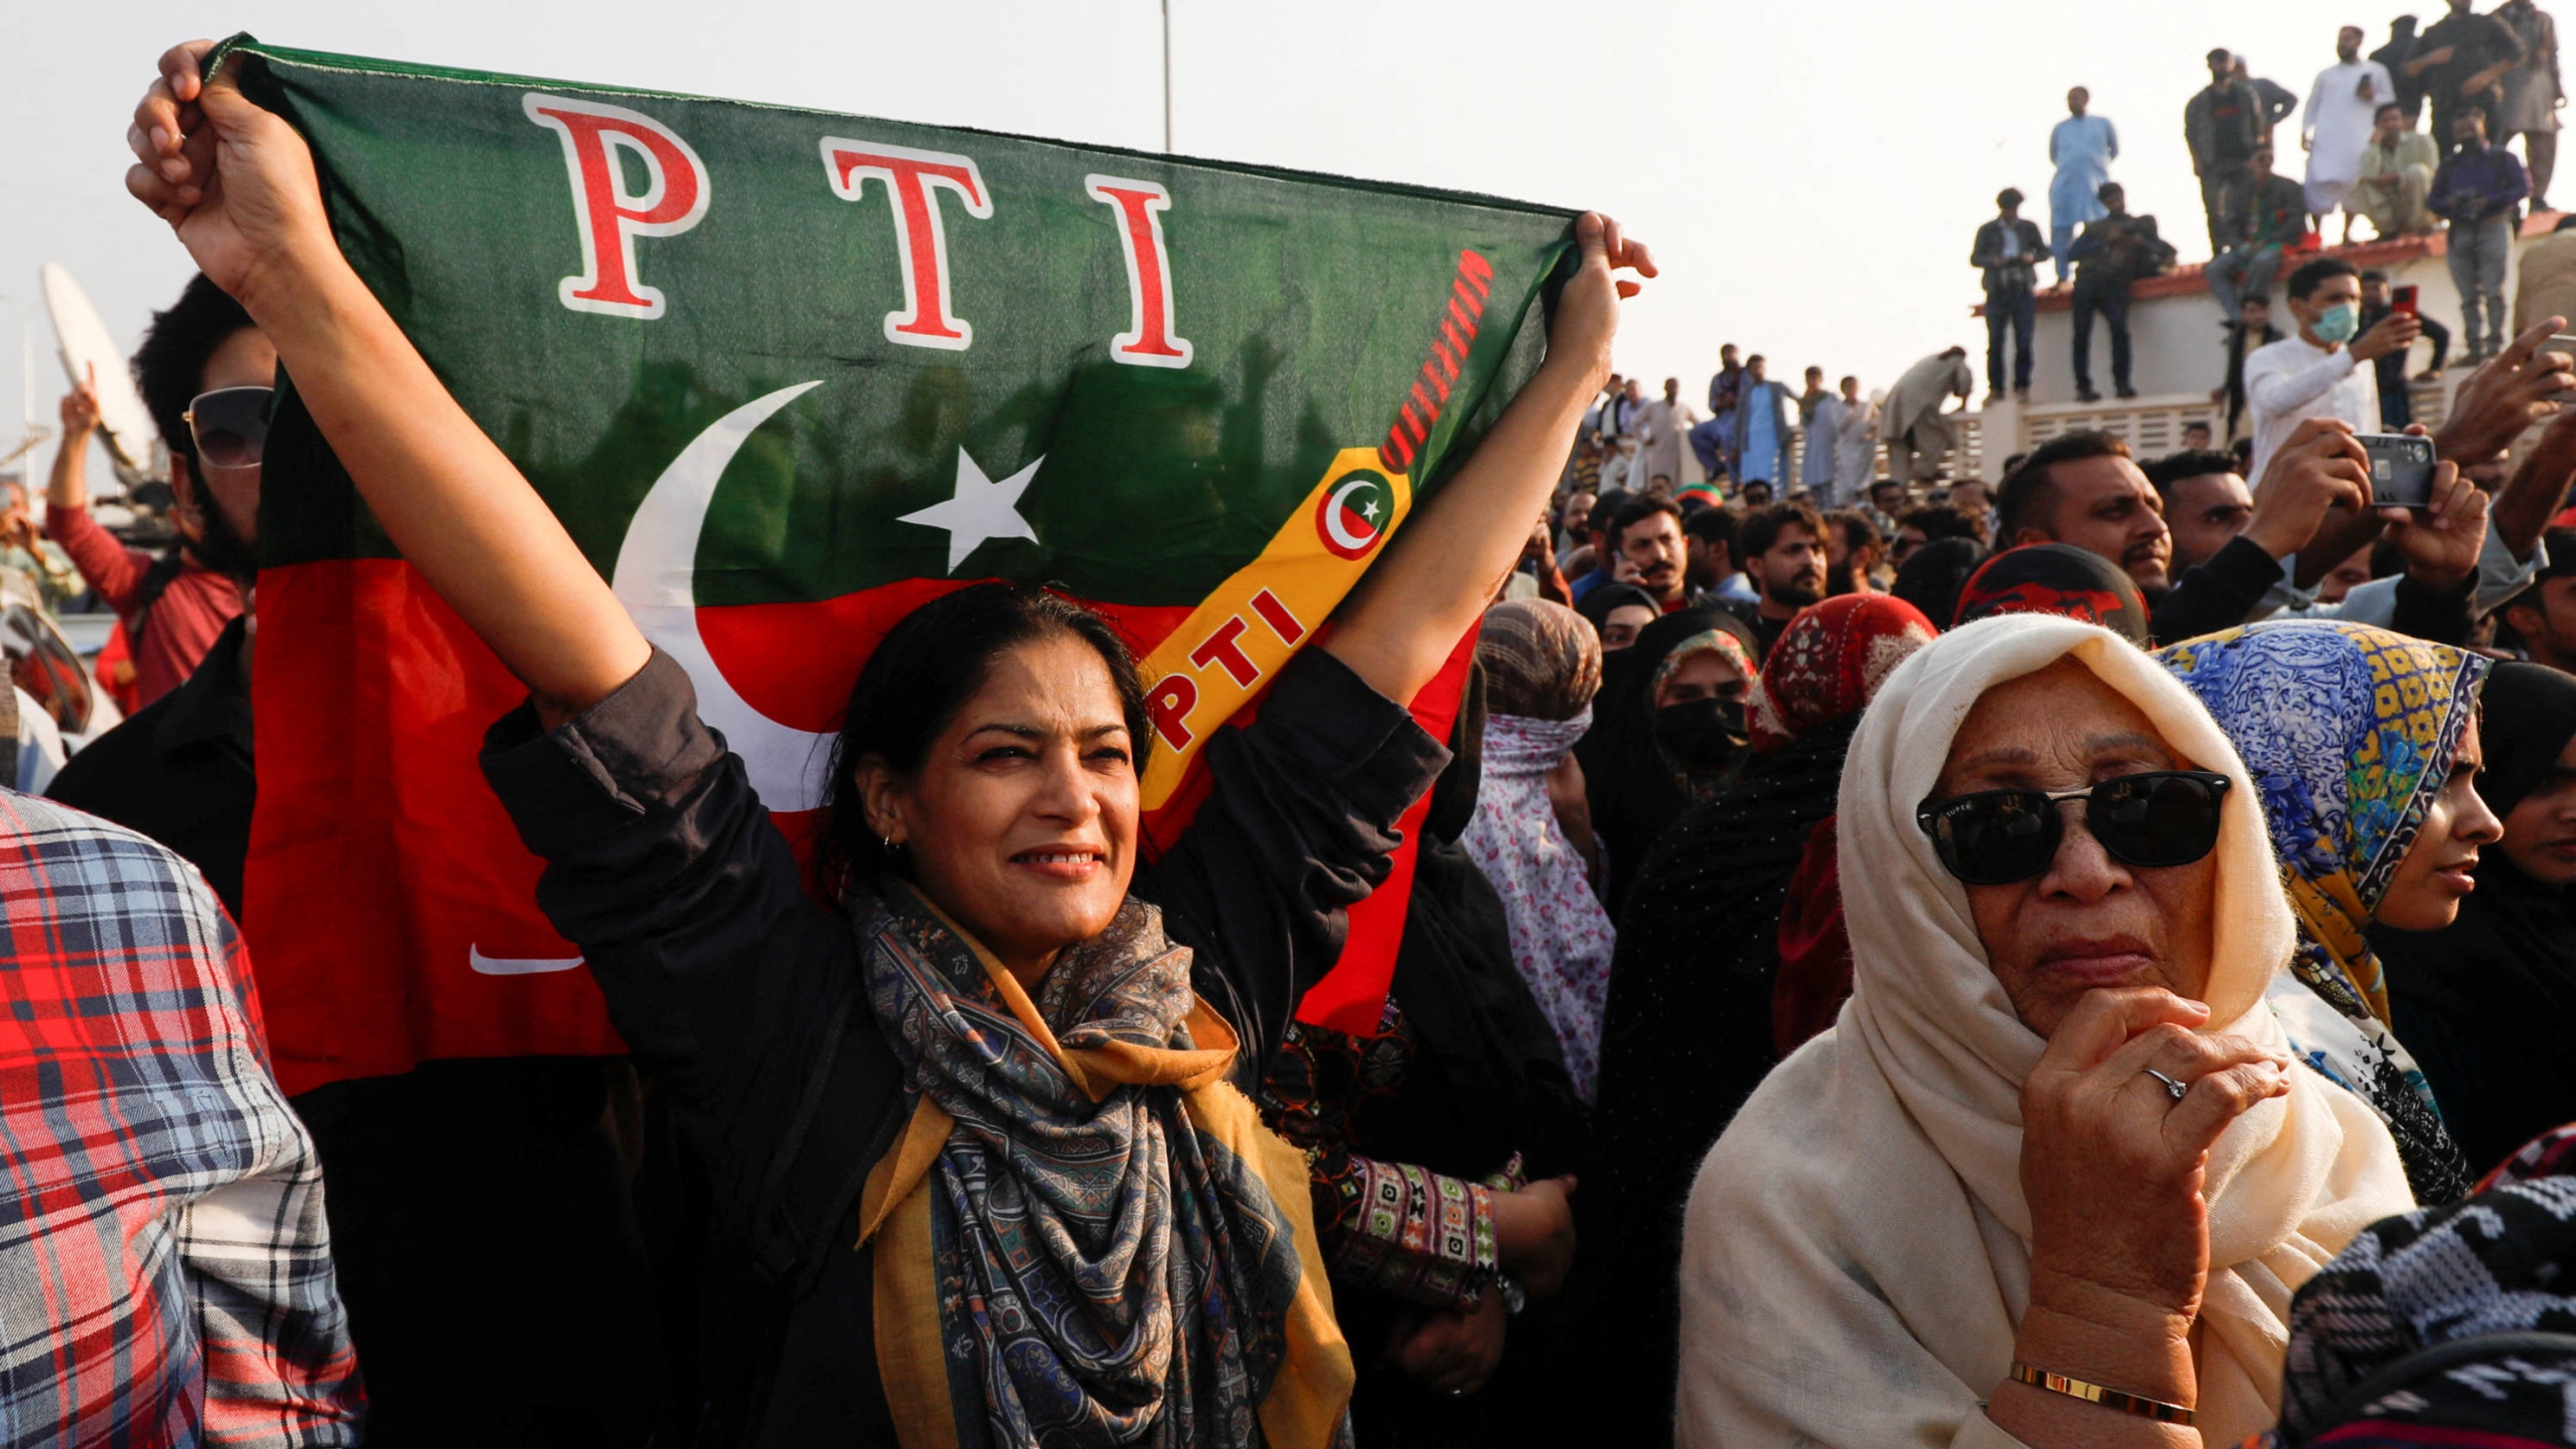 A supporter of Imran Khan's party, Pakistan Tehreek-e-Insaf (PTI), waves the party flag during a rally ahead of the general elections in Karachi, Pakistan 14 January 2024 (Reuters)